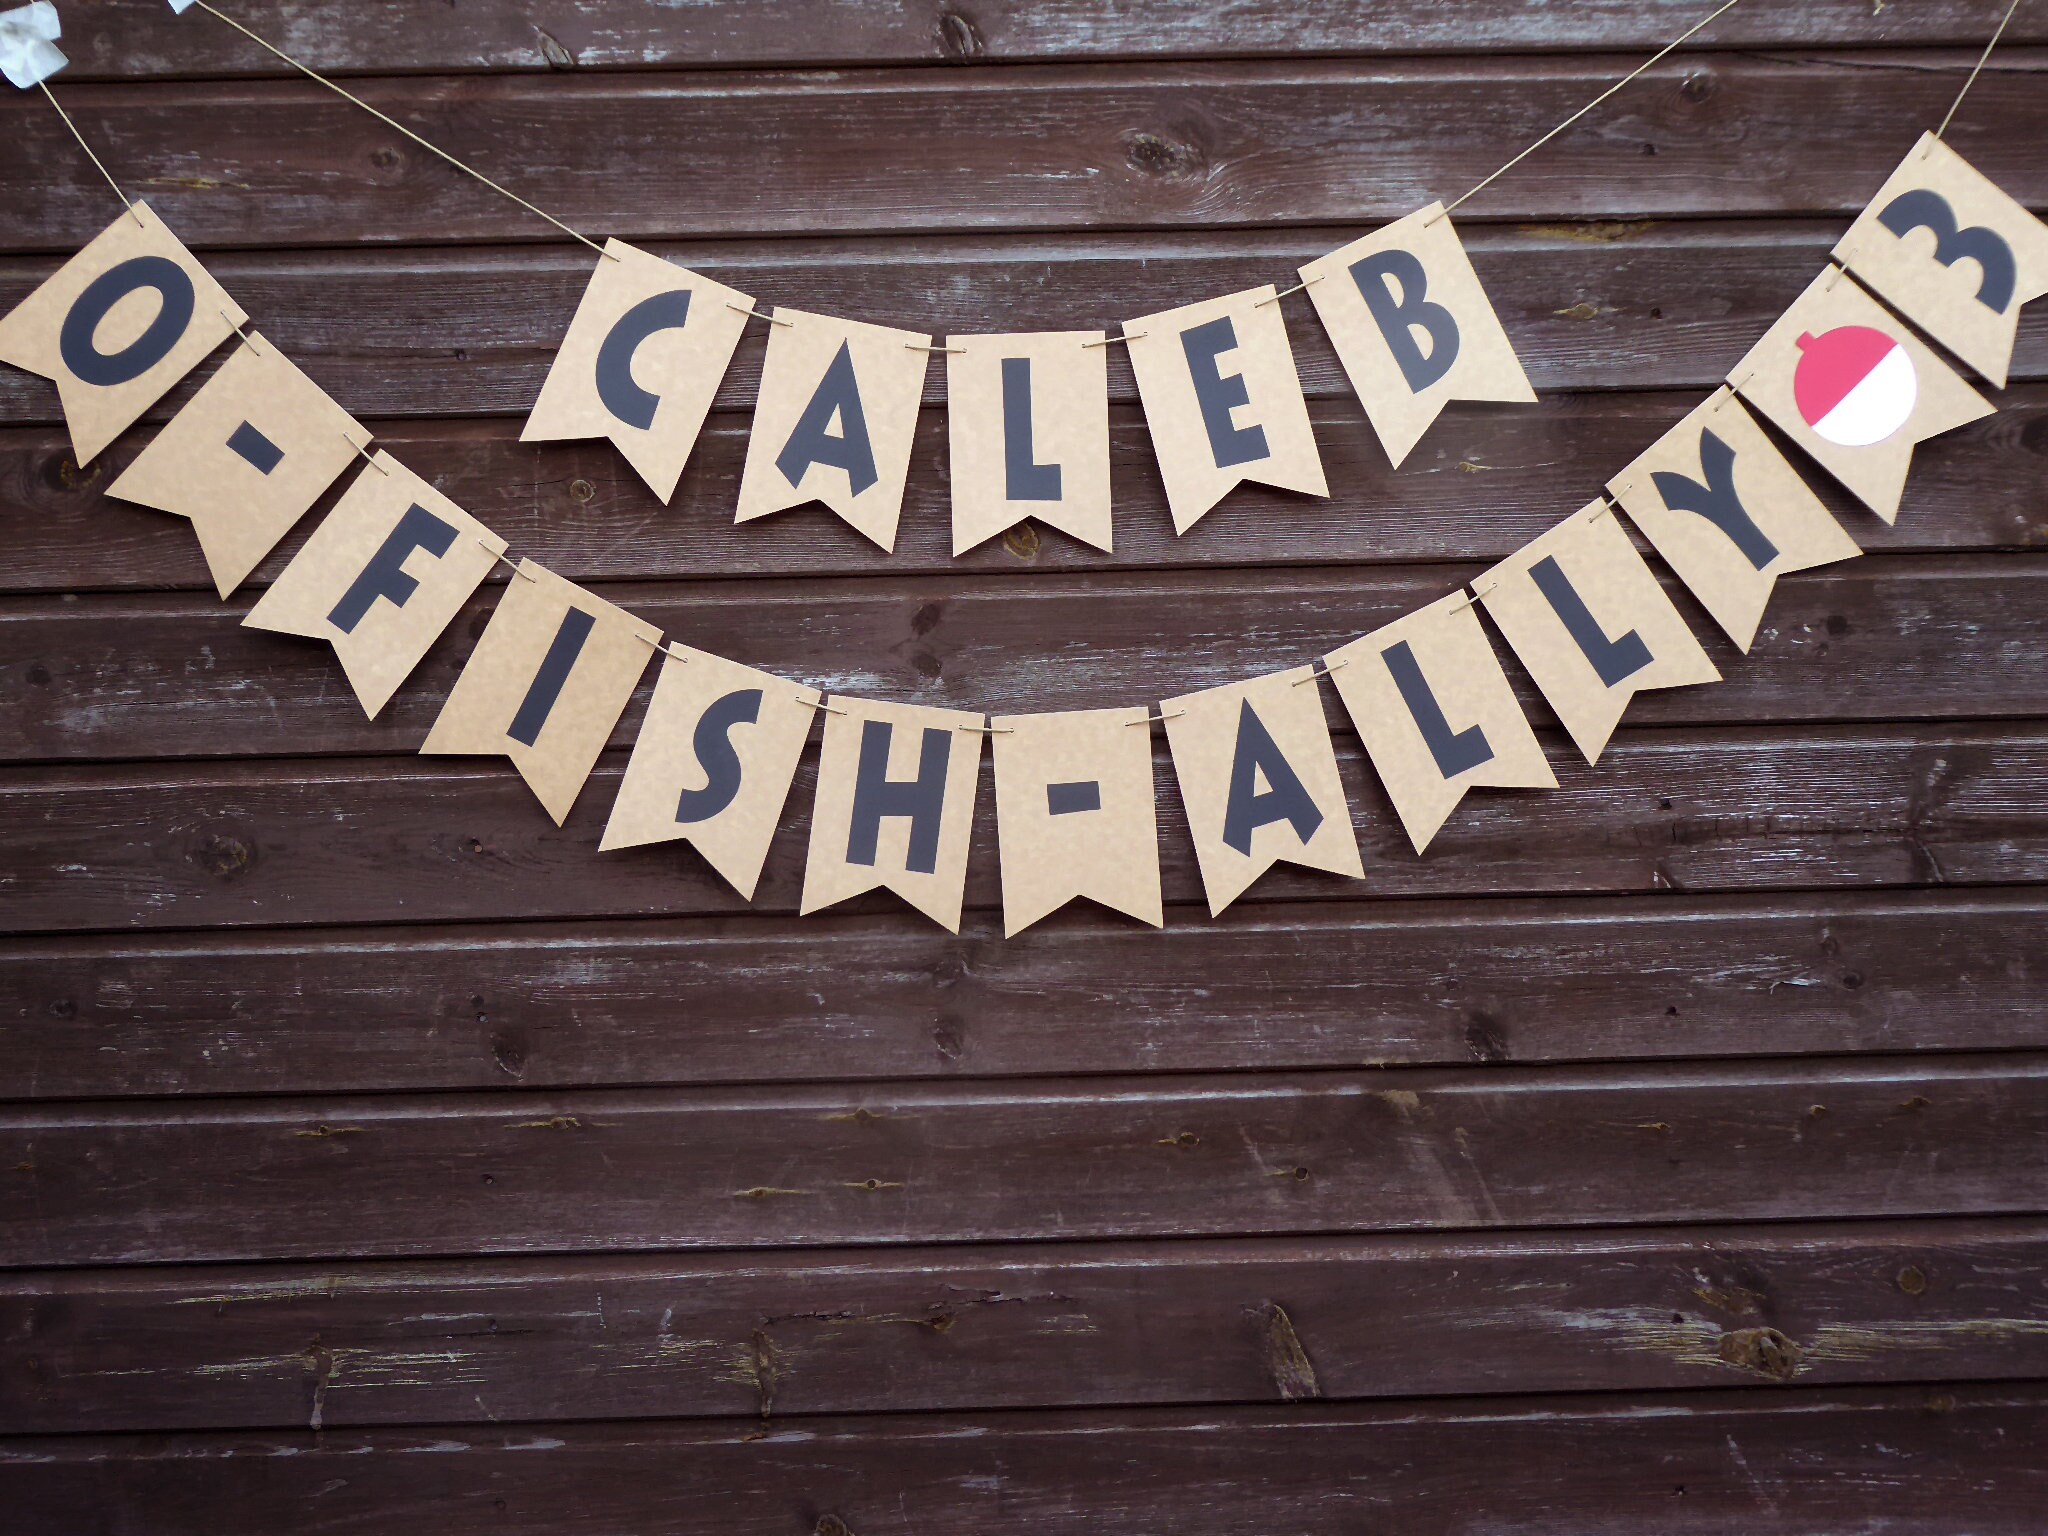 O-fish-ally One Fishing Birthday Banner, Fishing Themed 1st Birthday Party  Decoration, Can Be Customised for Any Age 